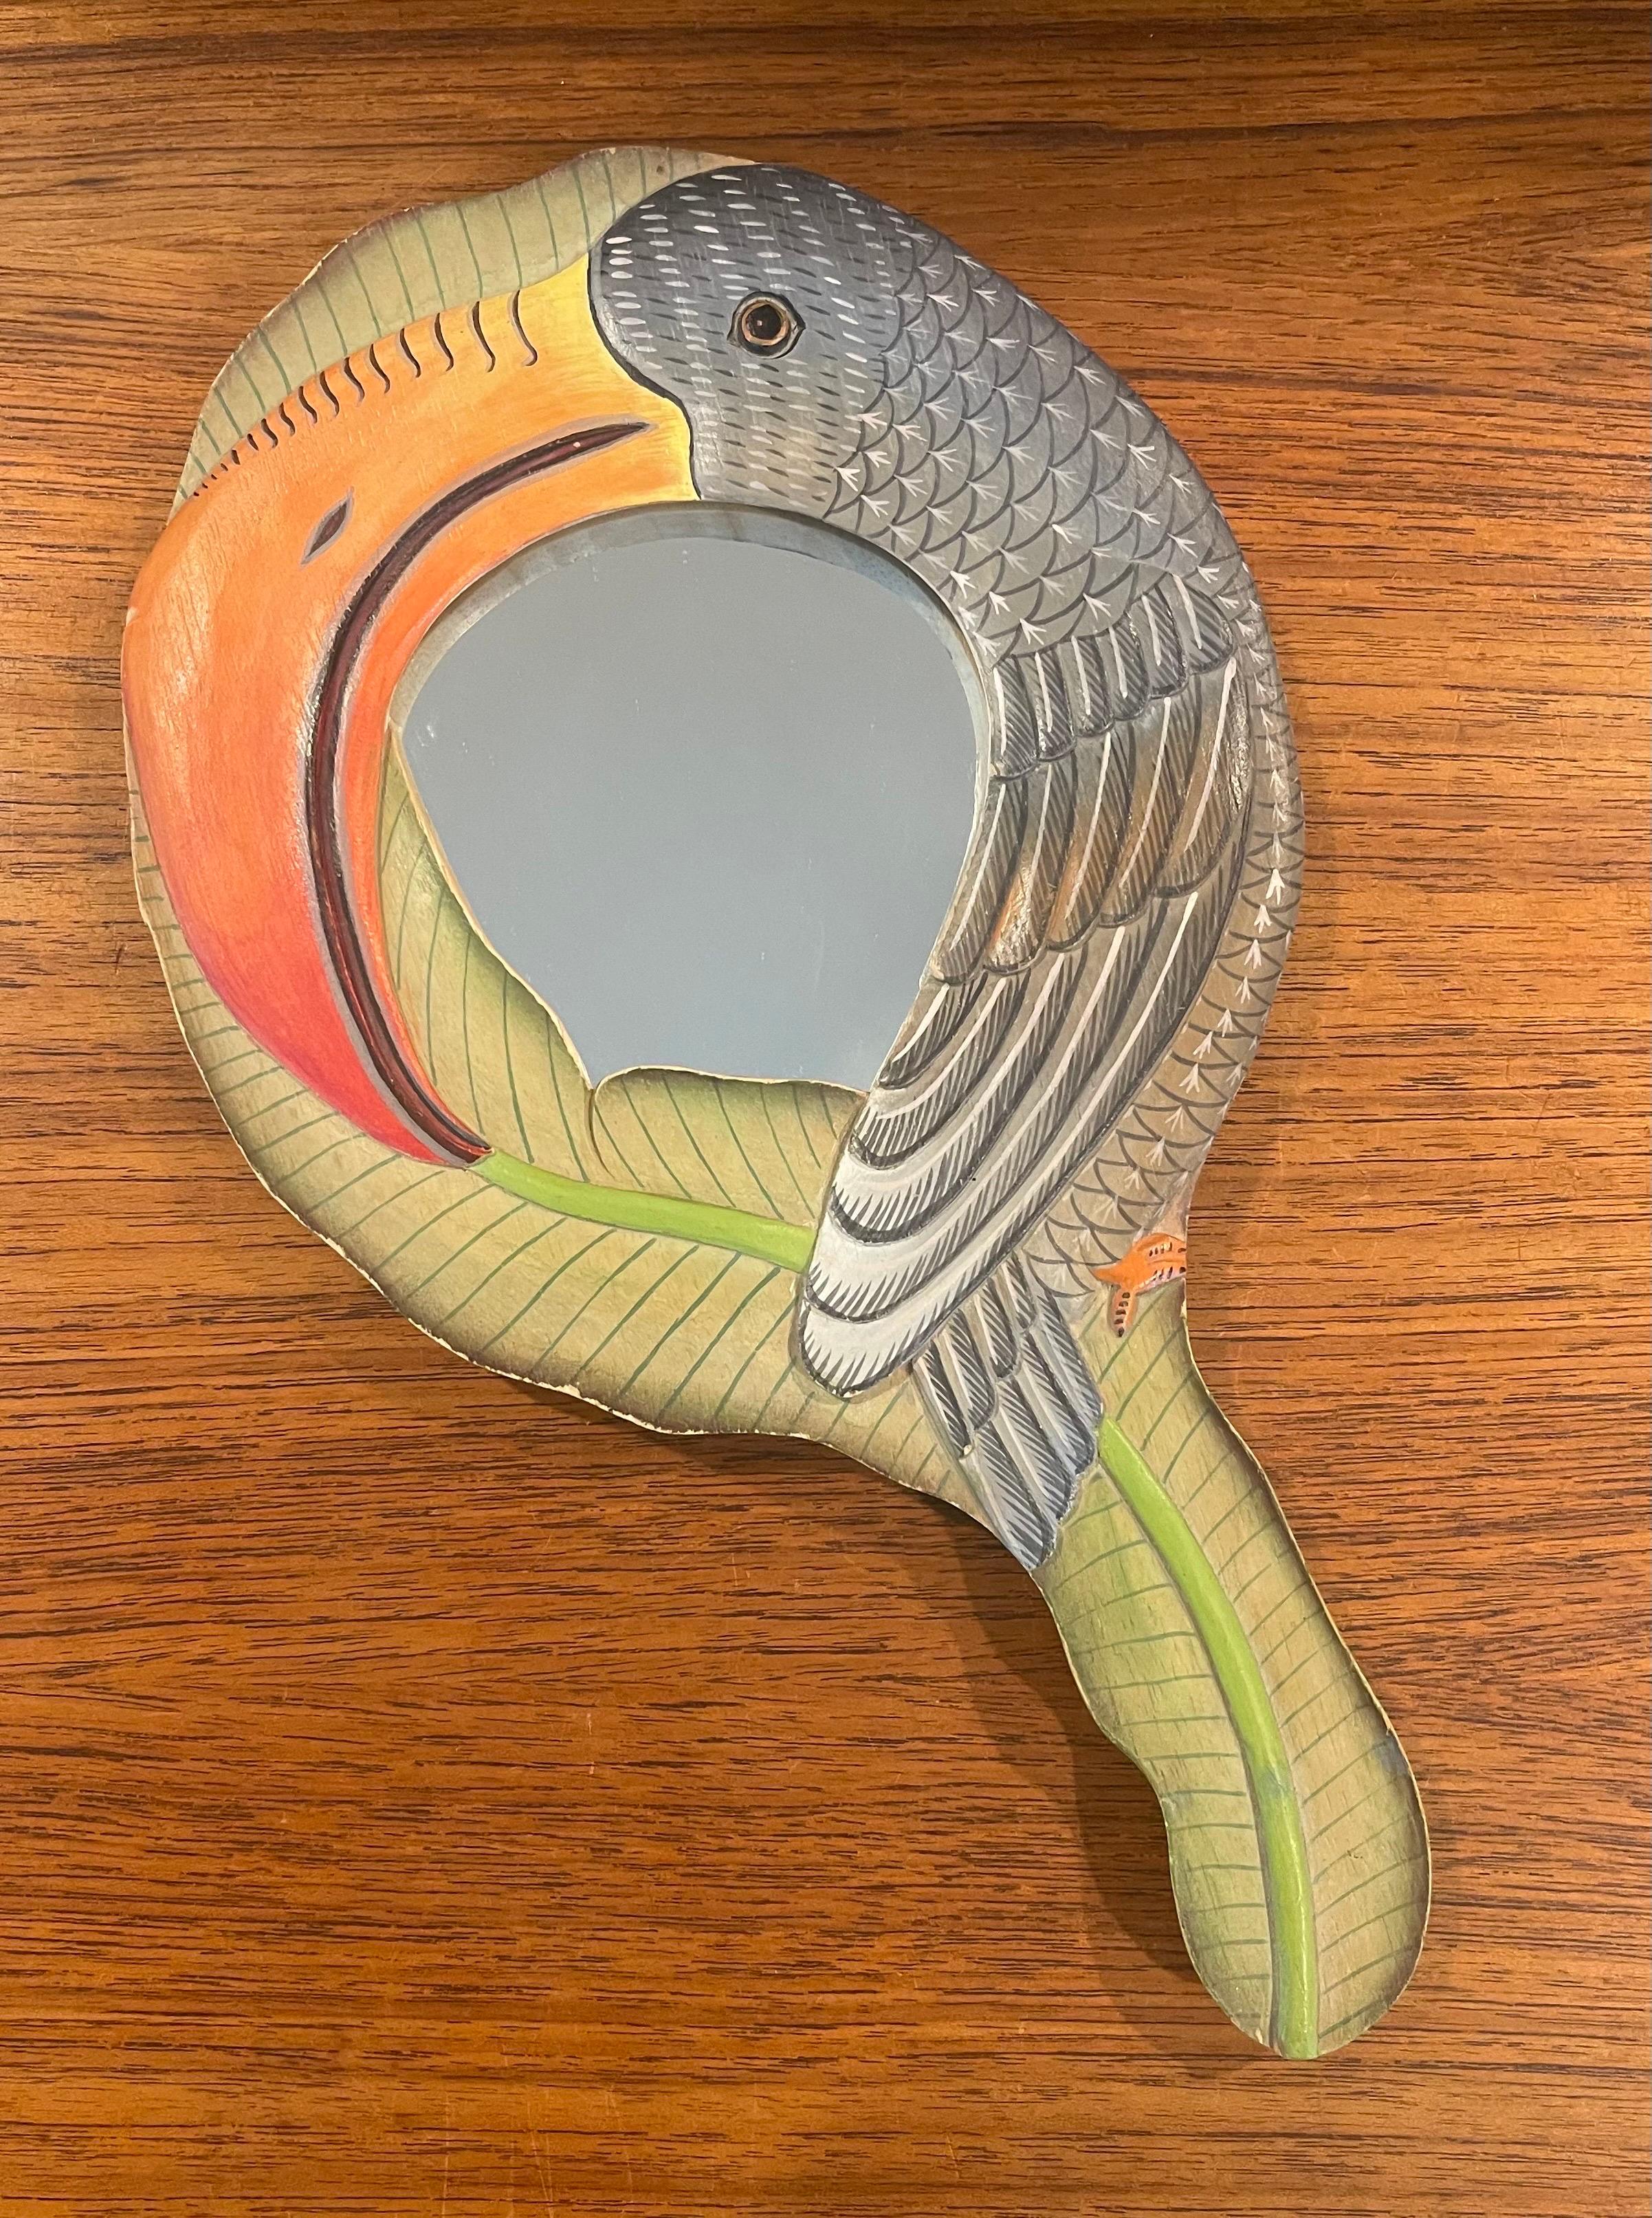 A nice hand carved and painted toucan hand mirror, circa 1980s. The mirror is beautifully hand crafted and brightly colored with a toucan and its beak encircling the hand mirror. The piece is in very good condition and measures 7.375